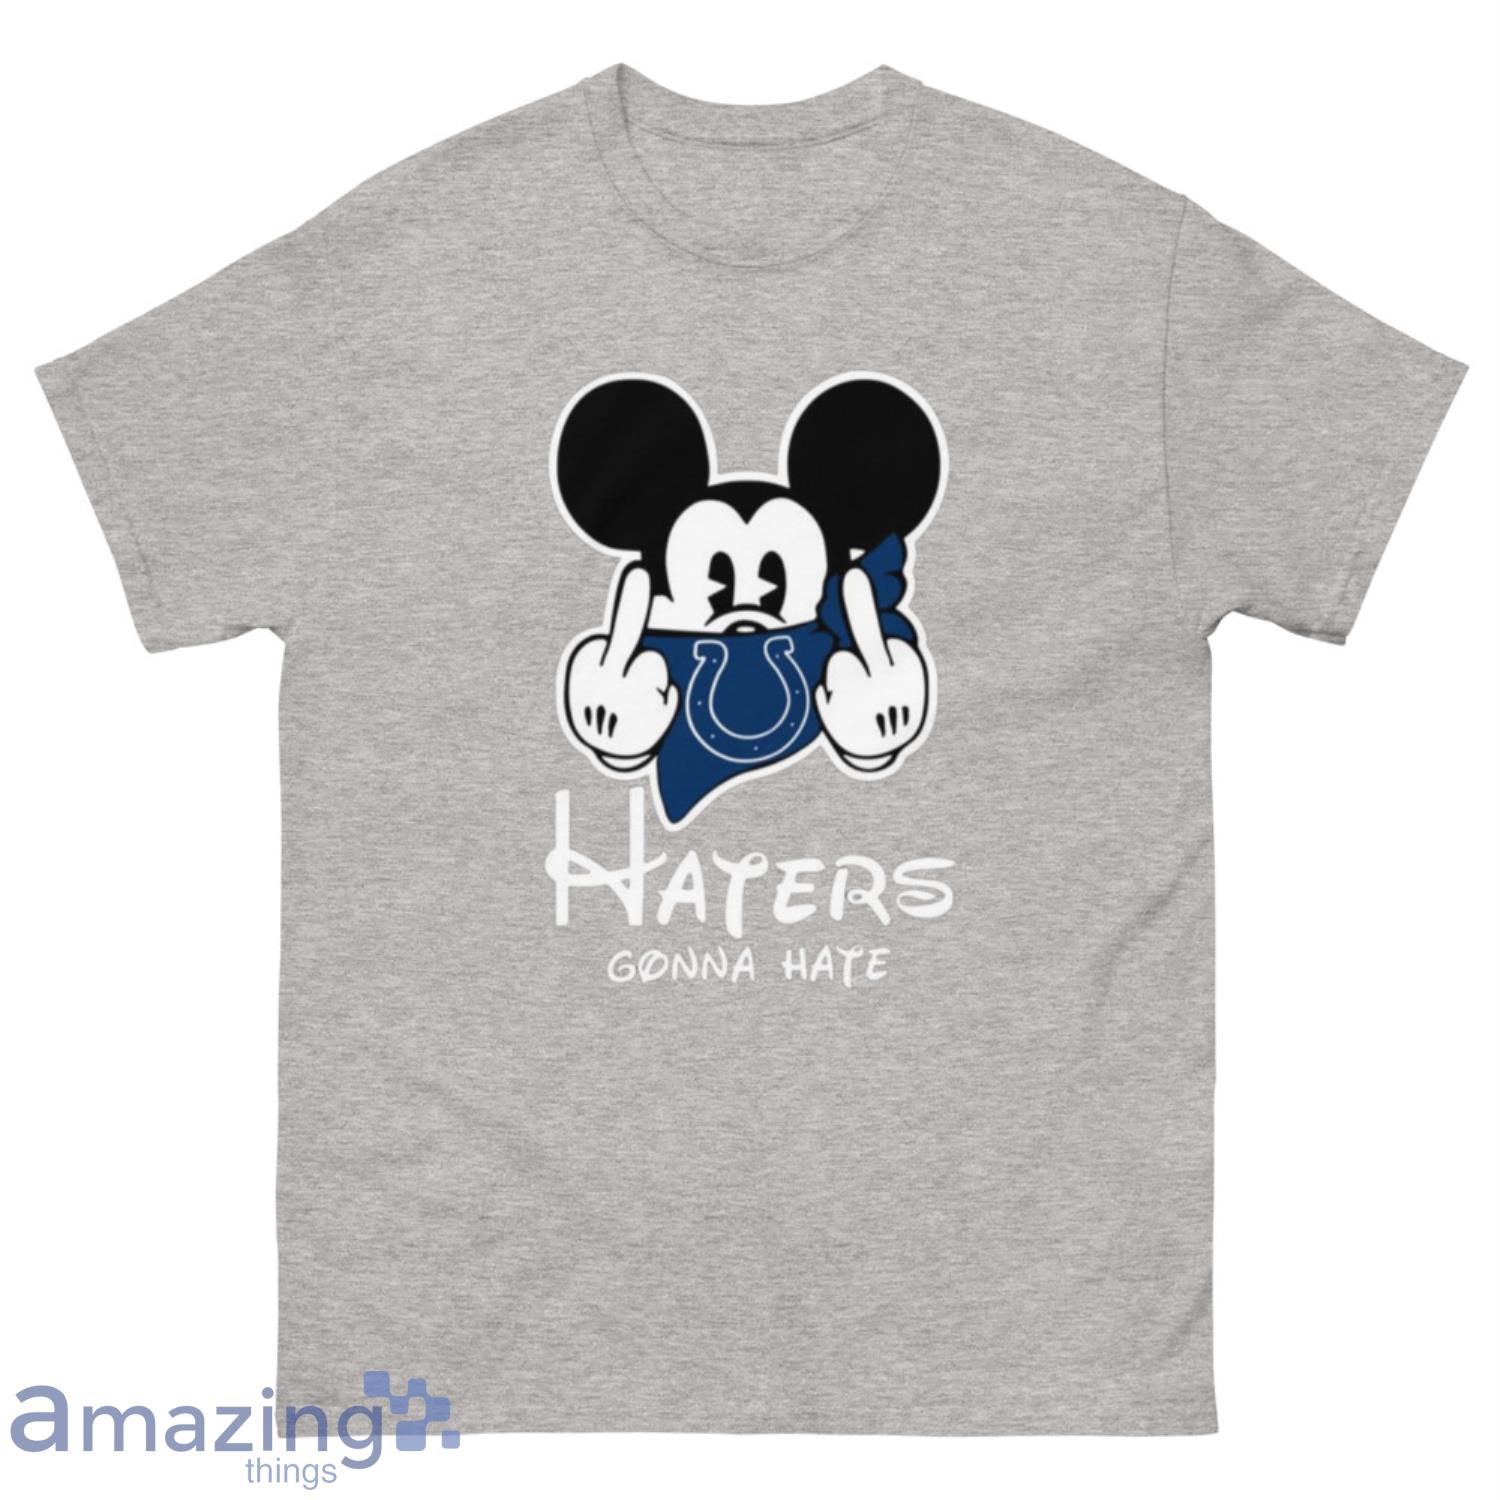 NFL Indianapolis Colts Haters Gonna Hate Mickey Mouse Disney Football T-Shirt Sweatshirt Hoodie - 500 Men’s Classic Tee Gildan-2